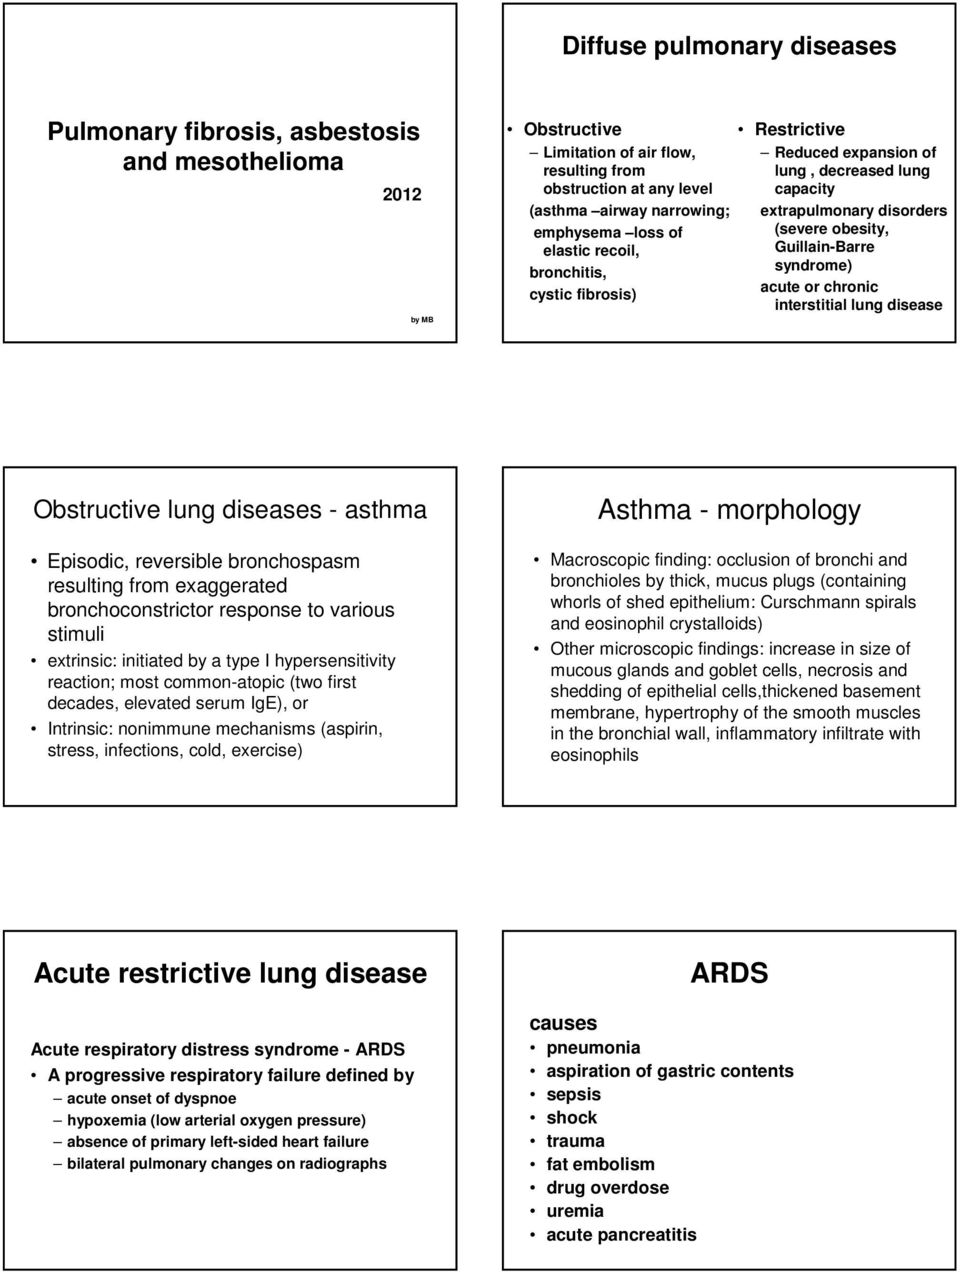 interstitial lung disease Obstructive lung diseases - asthma Episodic, reversible bronchospasm resulting from exaggerated bronchoconstrictor response to various stimuli extrinsic: initiated by a type